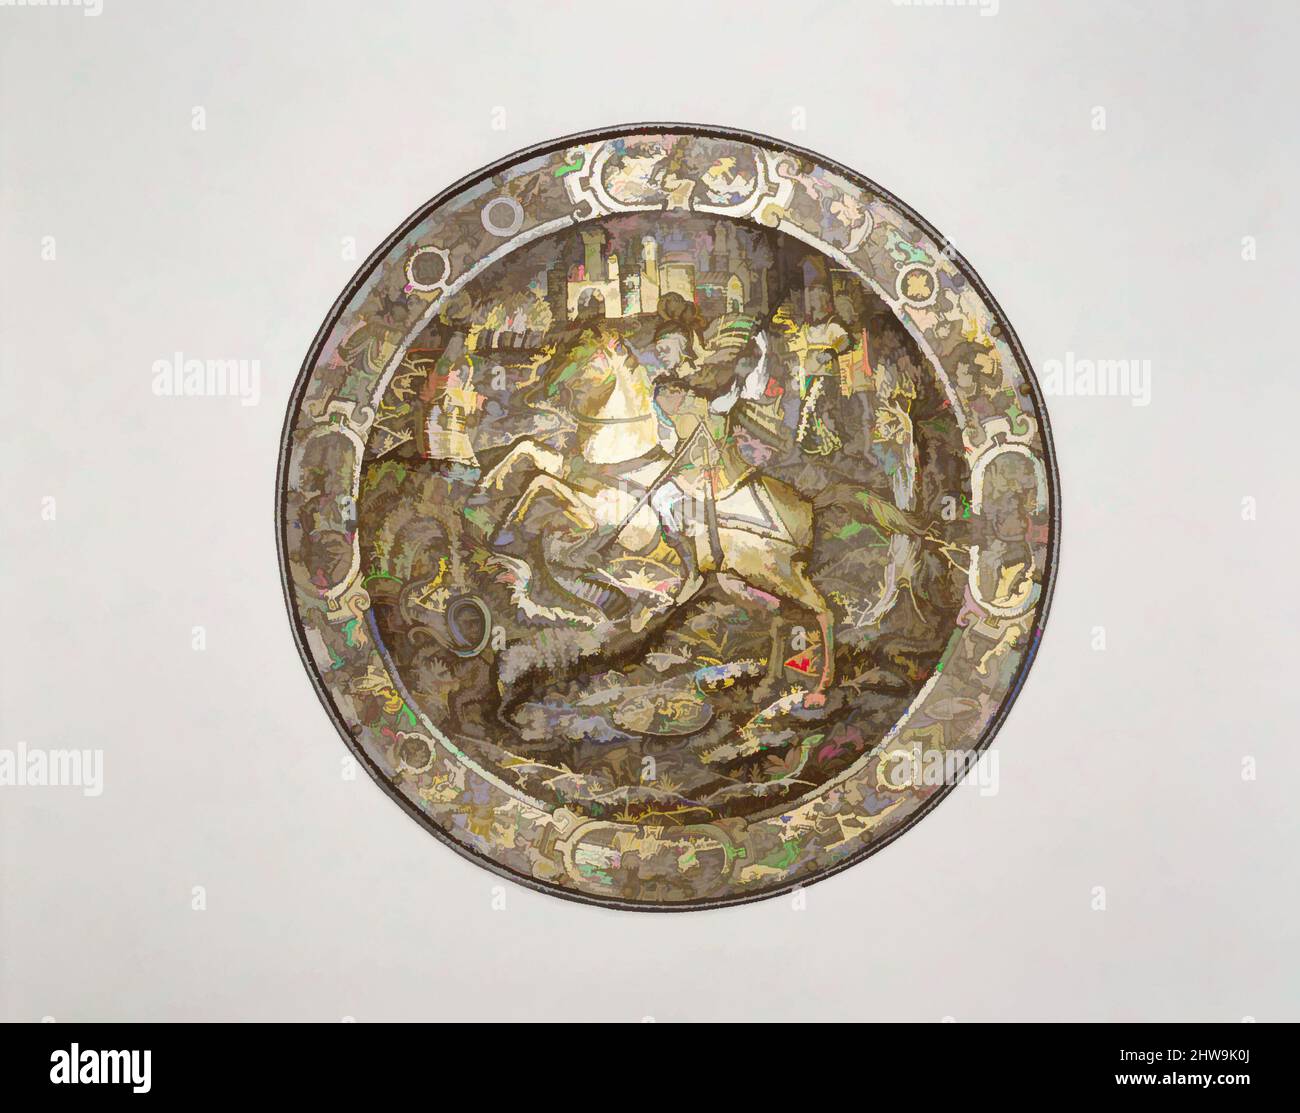 Art inspired by Shield Depicting Saint George Slaying the Dragon, ca. 1560–70, Milan, Italian, Milan, Steel, gold, silver, Diam. 23 1/4 in. (59.1 cm); D. at center 3 1/16 in. (7.8 cm); Wt. 8 lb. 6 oz. (3810 g), Shields, Classic works modernized by Artotop with a splash of modernity. Shapes, color and value, eye-catching visual impact on art. Emotions through freedom of artworks in a contemporary way. A timeless message pursuing a wildly creative new direction. Artists turning to the digital medium and creating the Artotop NFT Stock Photo